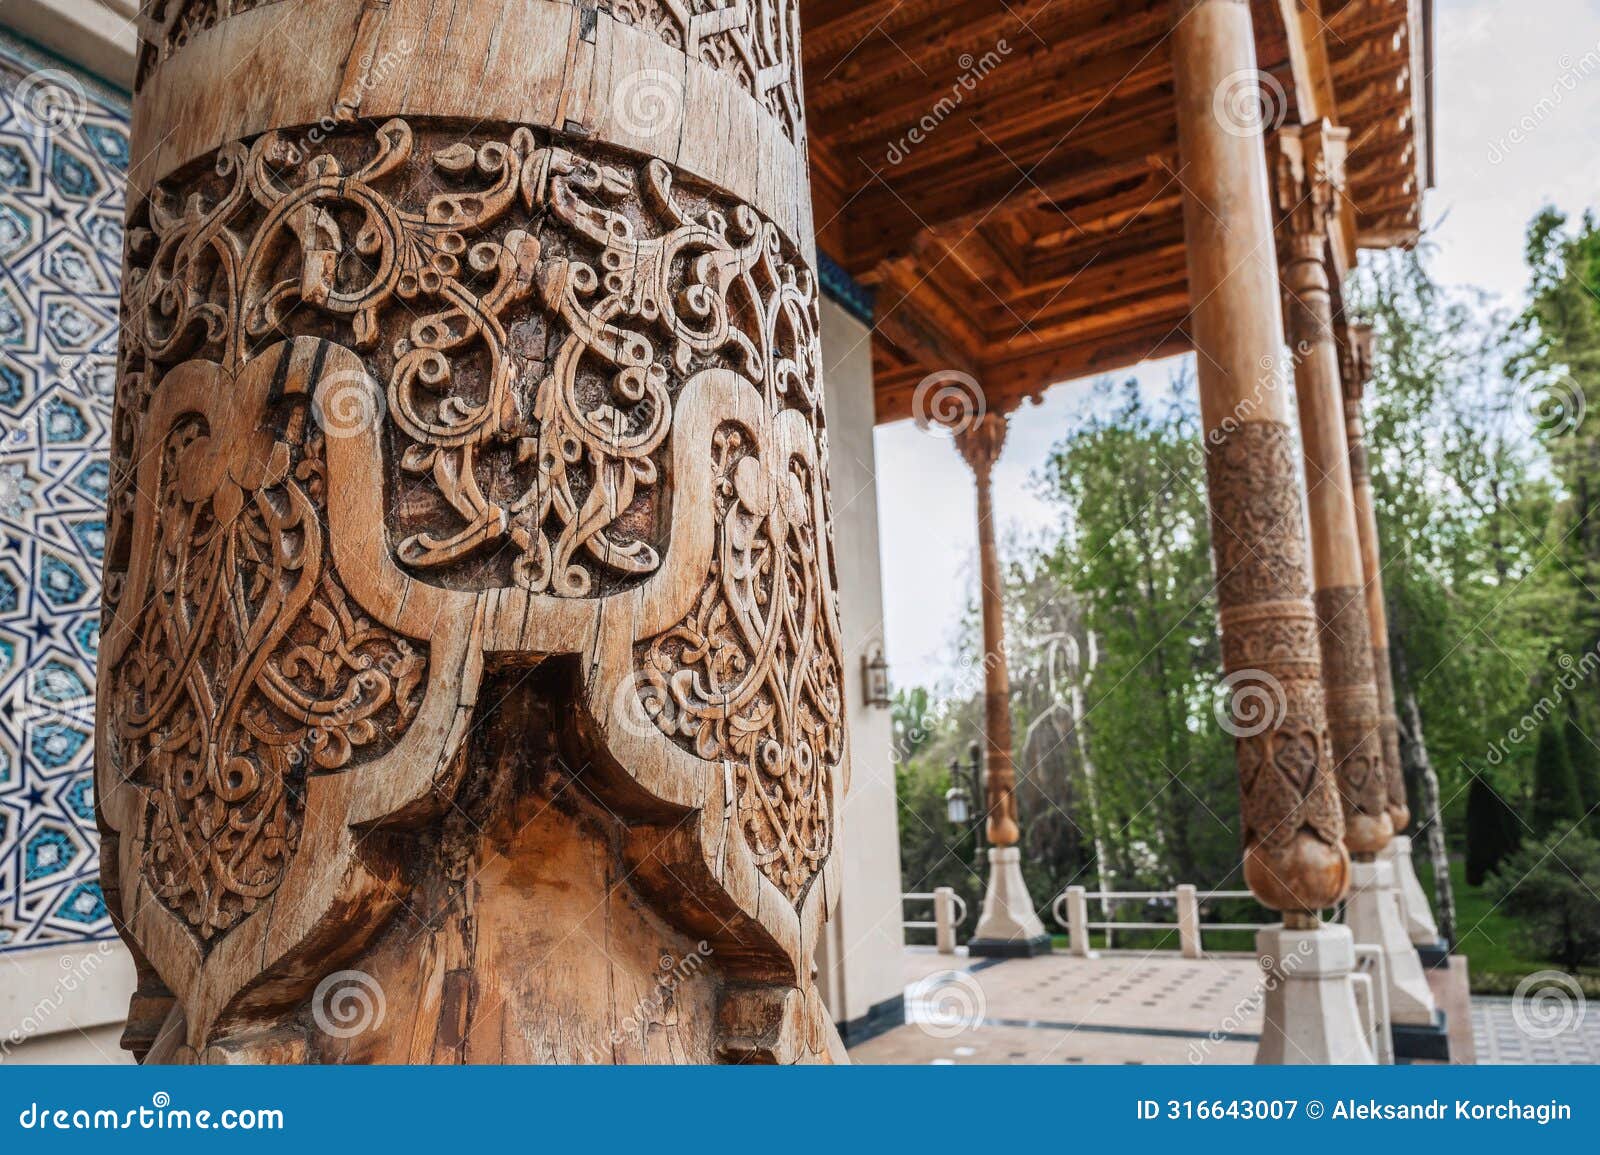 wooden column with carved oriental pattern uzbek ornament in museum of victims of political repression in tashkent in